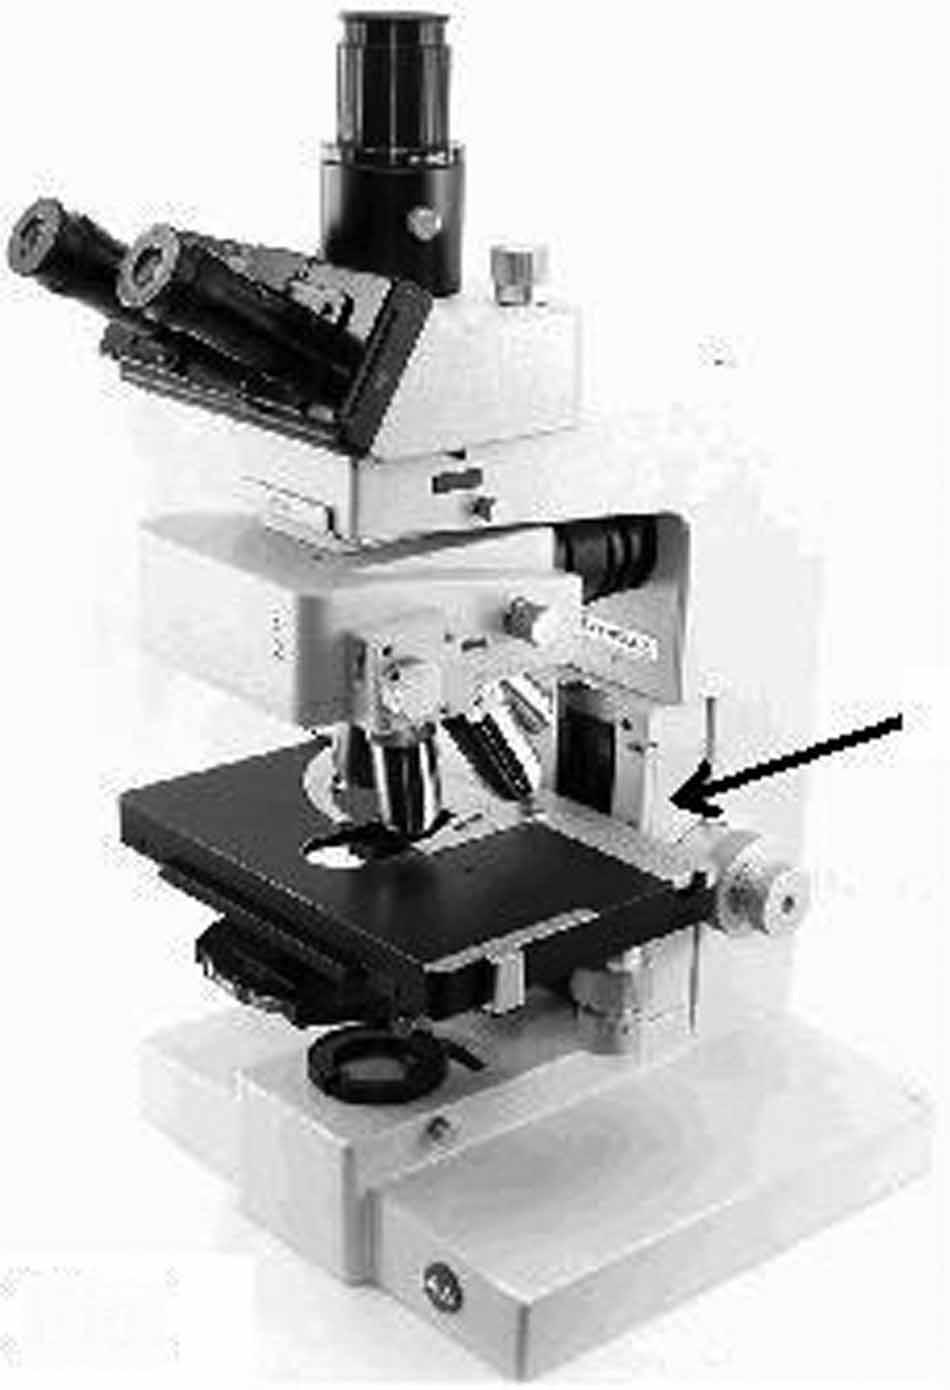 Method for locating light-microscope specimens 93 Downloaded by [Saúl Blanco] at 09:38 26 May 2012 Fig. 3. Microscope stand with slide support (arrow) opposite the eyepieces.